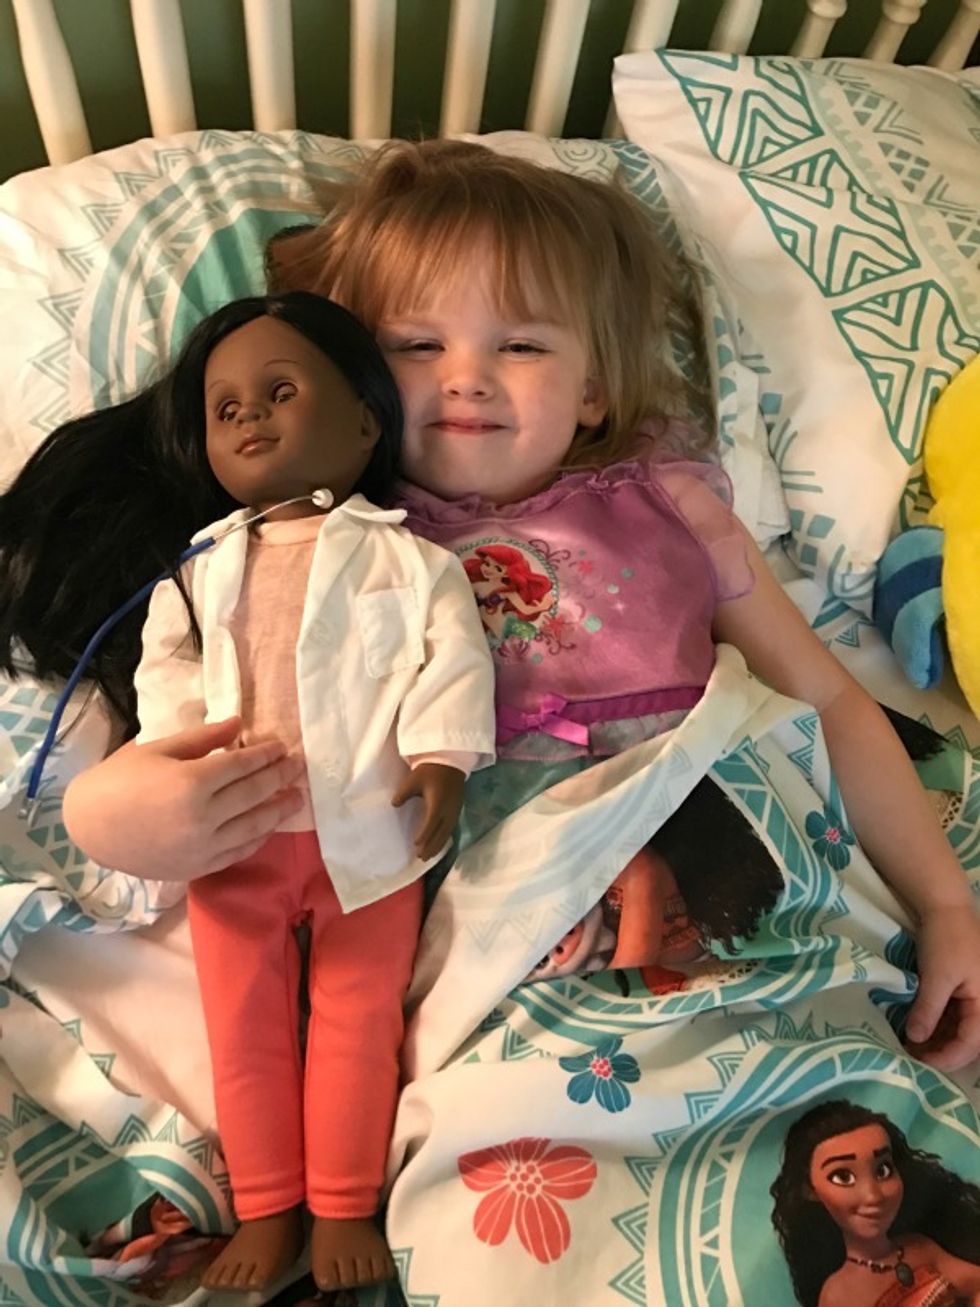 Isn't It Sad That Finding A Colored Doll Is Making Headlines?